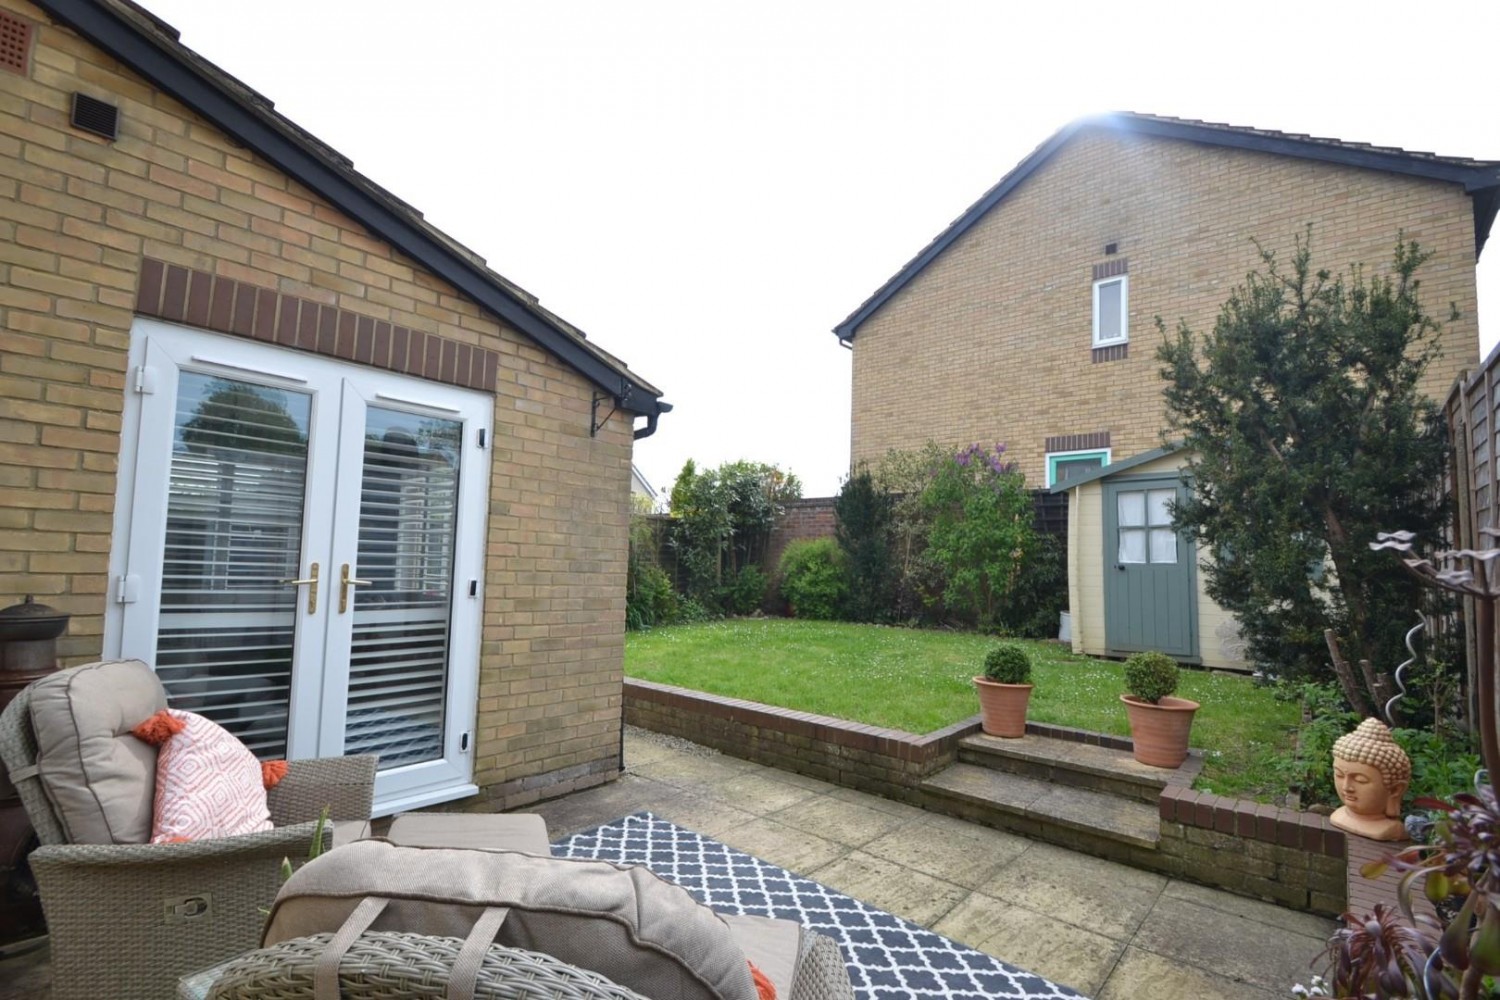 Meadow View, Buntingford